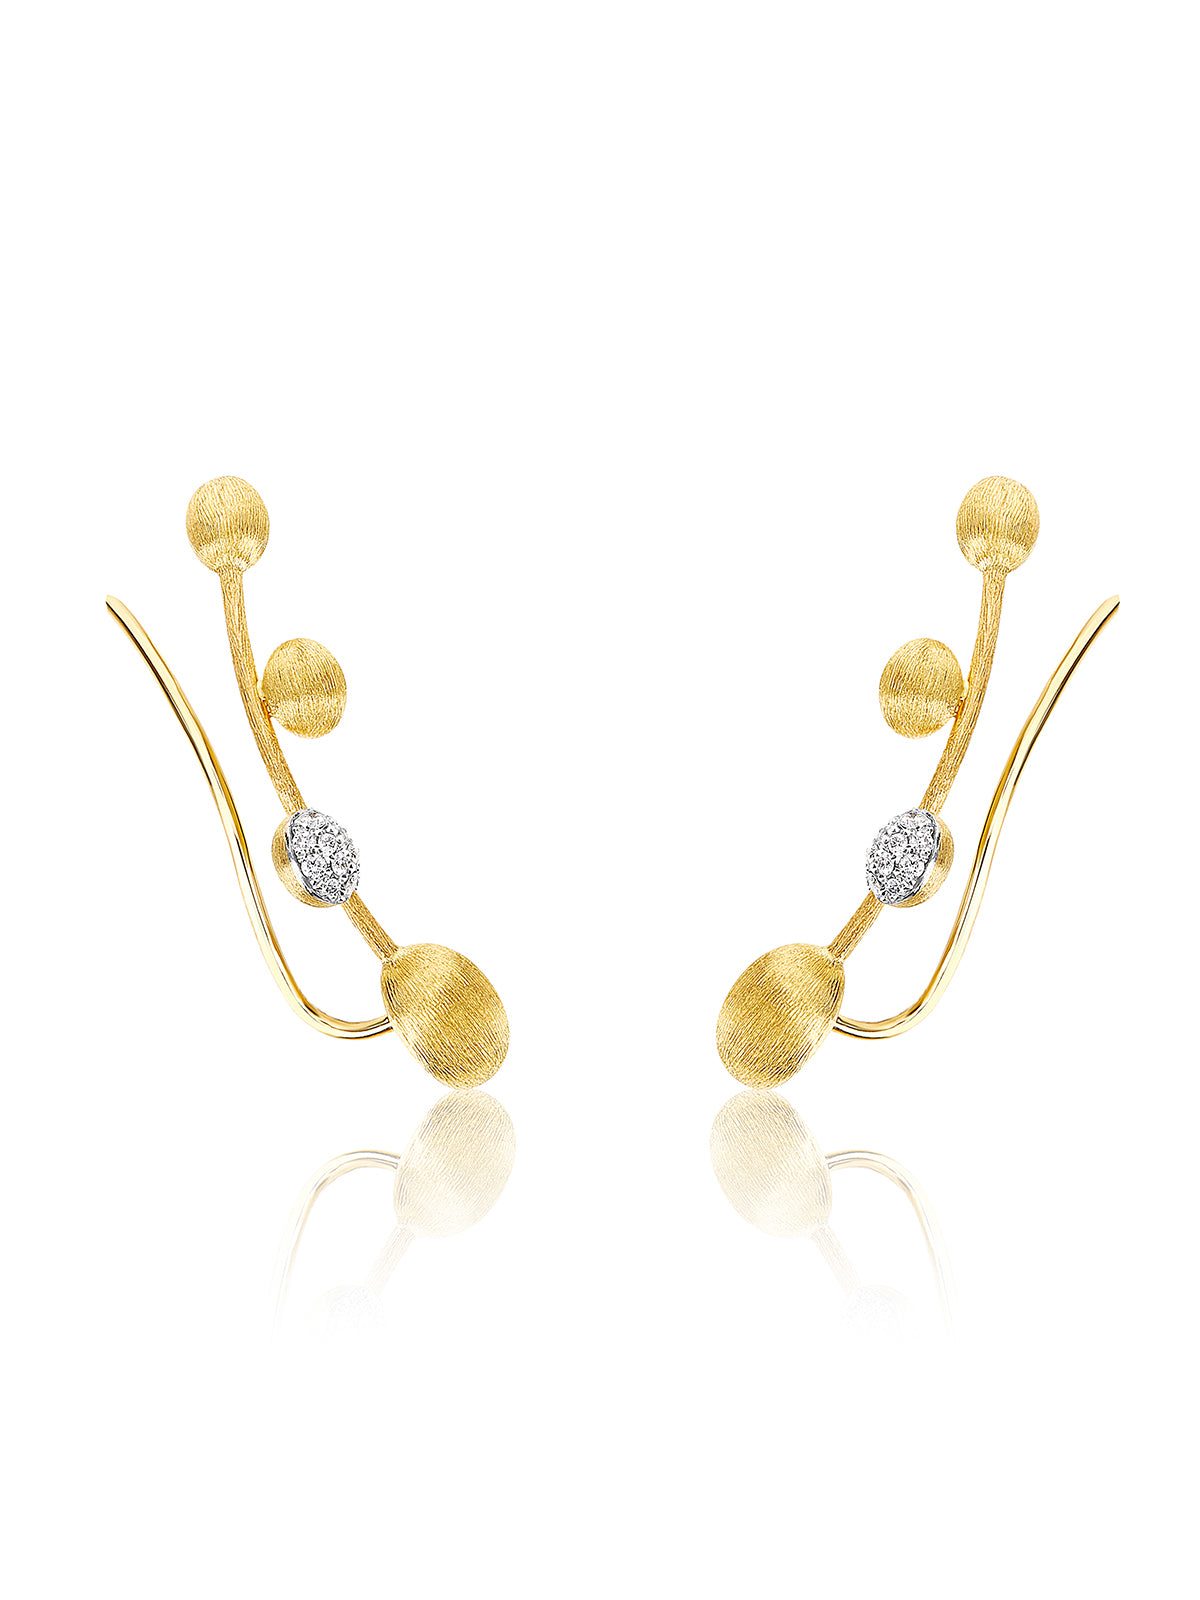 "Élite" gold and diamonds twig-shaped earrings